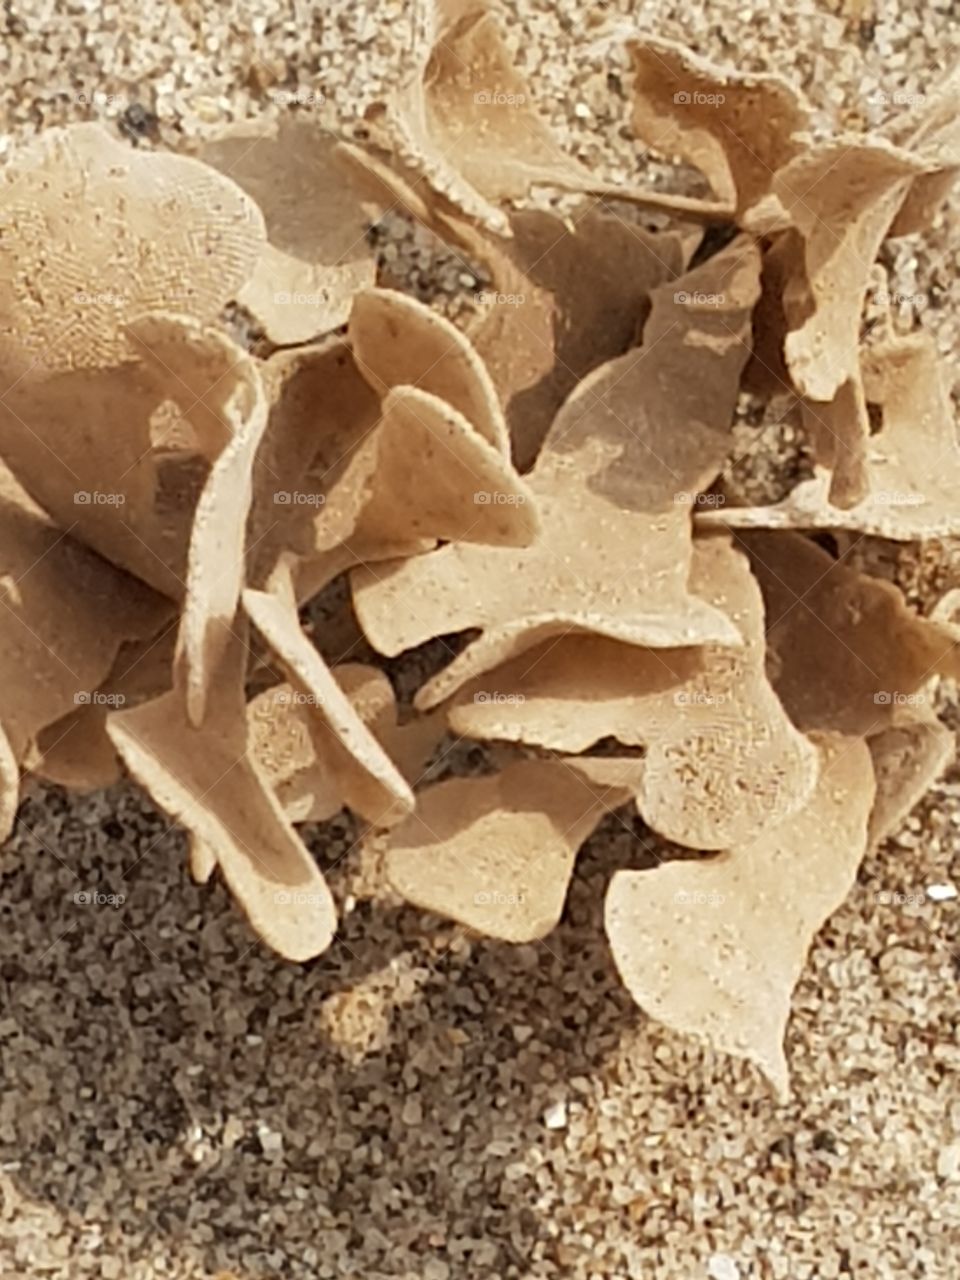 I planted the buff colored dried seaweed in the golden sand. In the sunshine the shadow of the leaves contrast against the lighter sand giving a 3d effect.